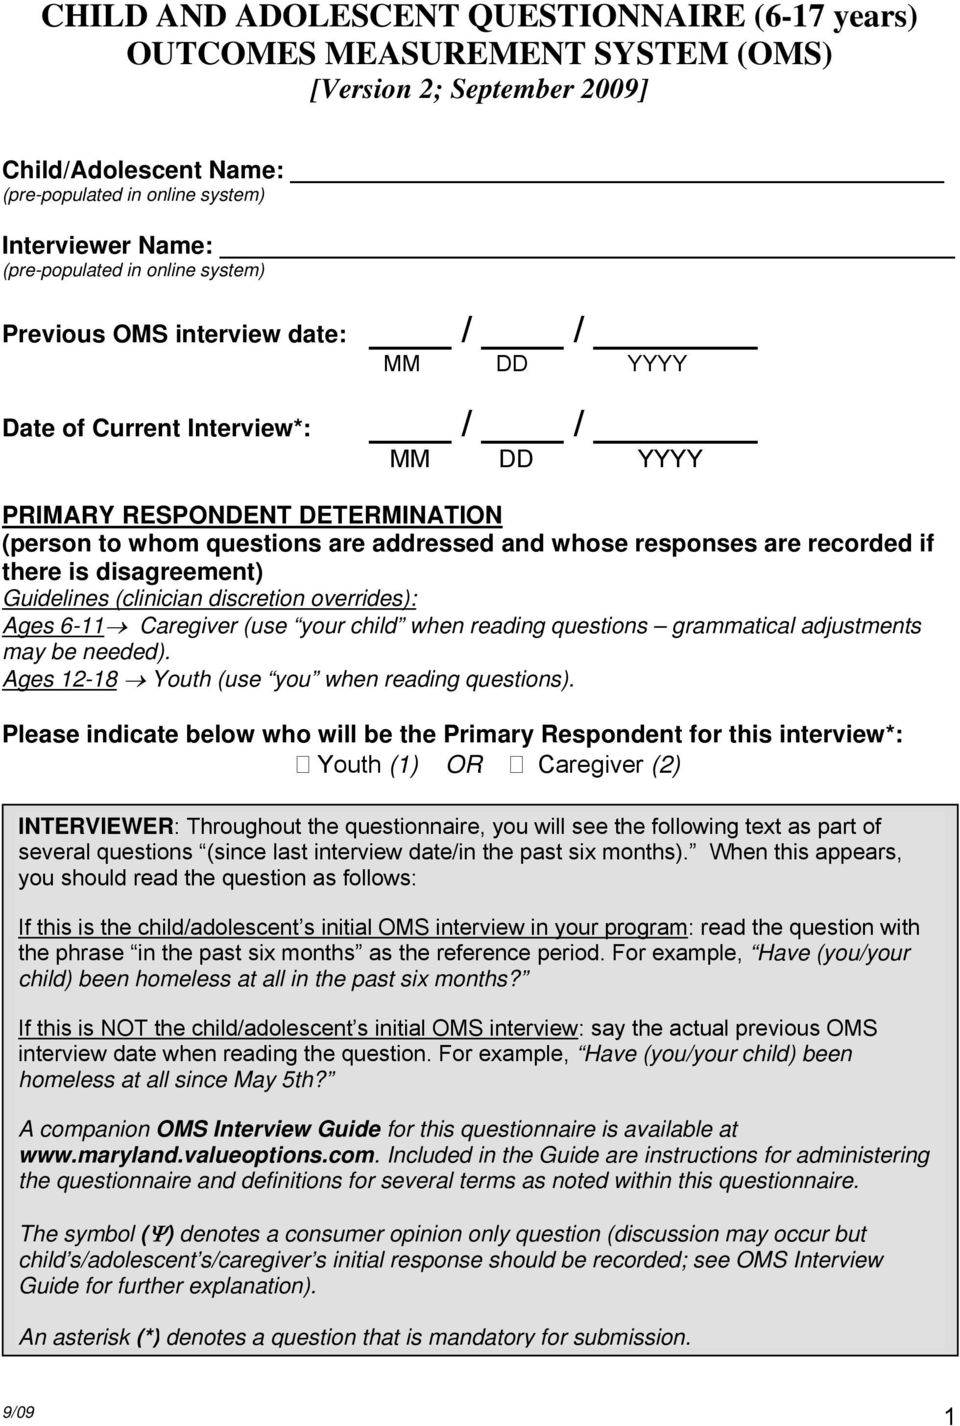 are recorded if there is disagreement) Guidelines (clinician discretion overrides): Ages 6-11 Caregiver (use your child when reading questions grammatical adjustments may be needed).